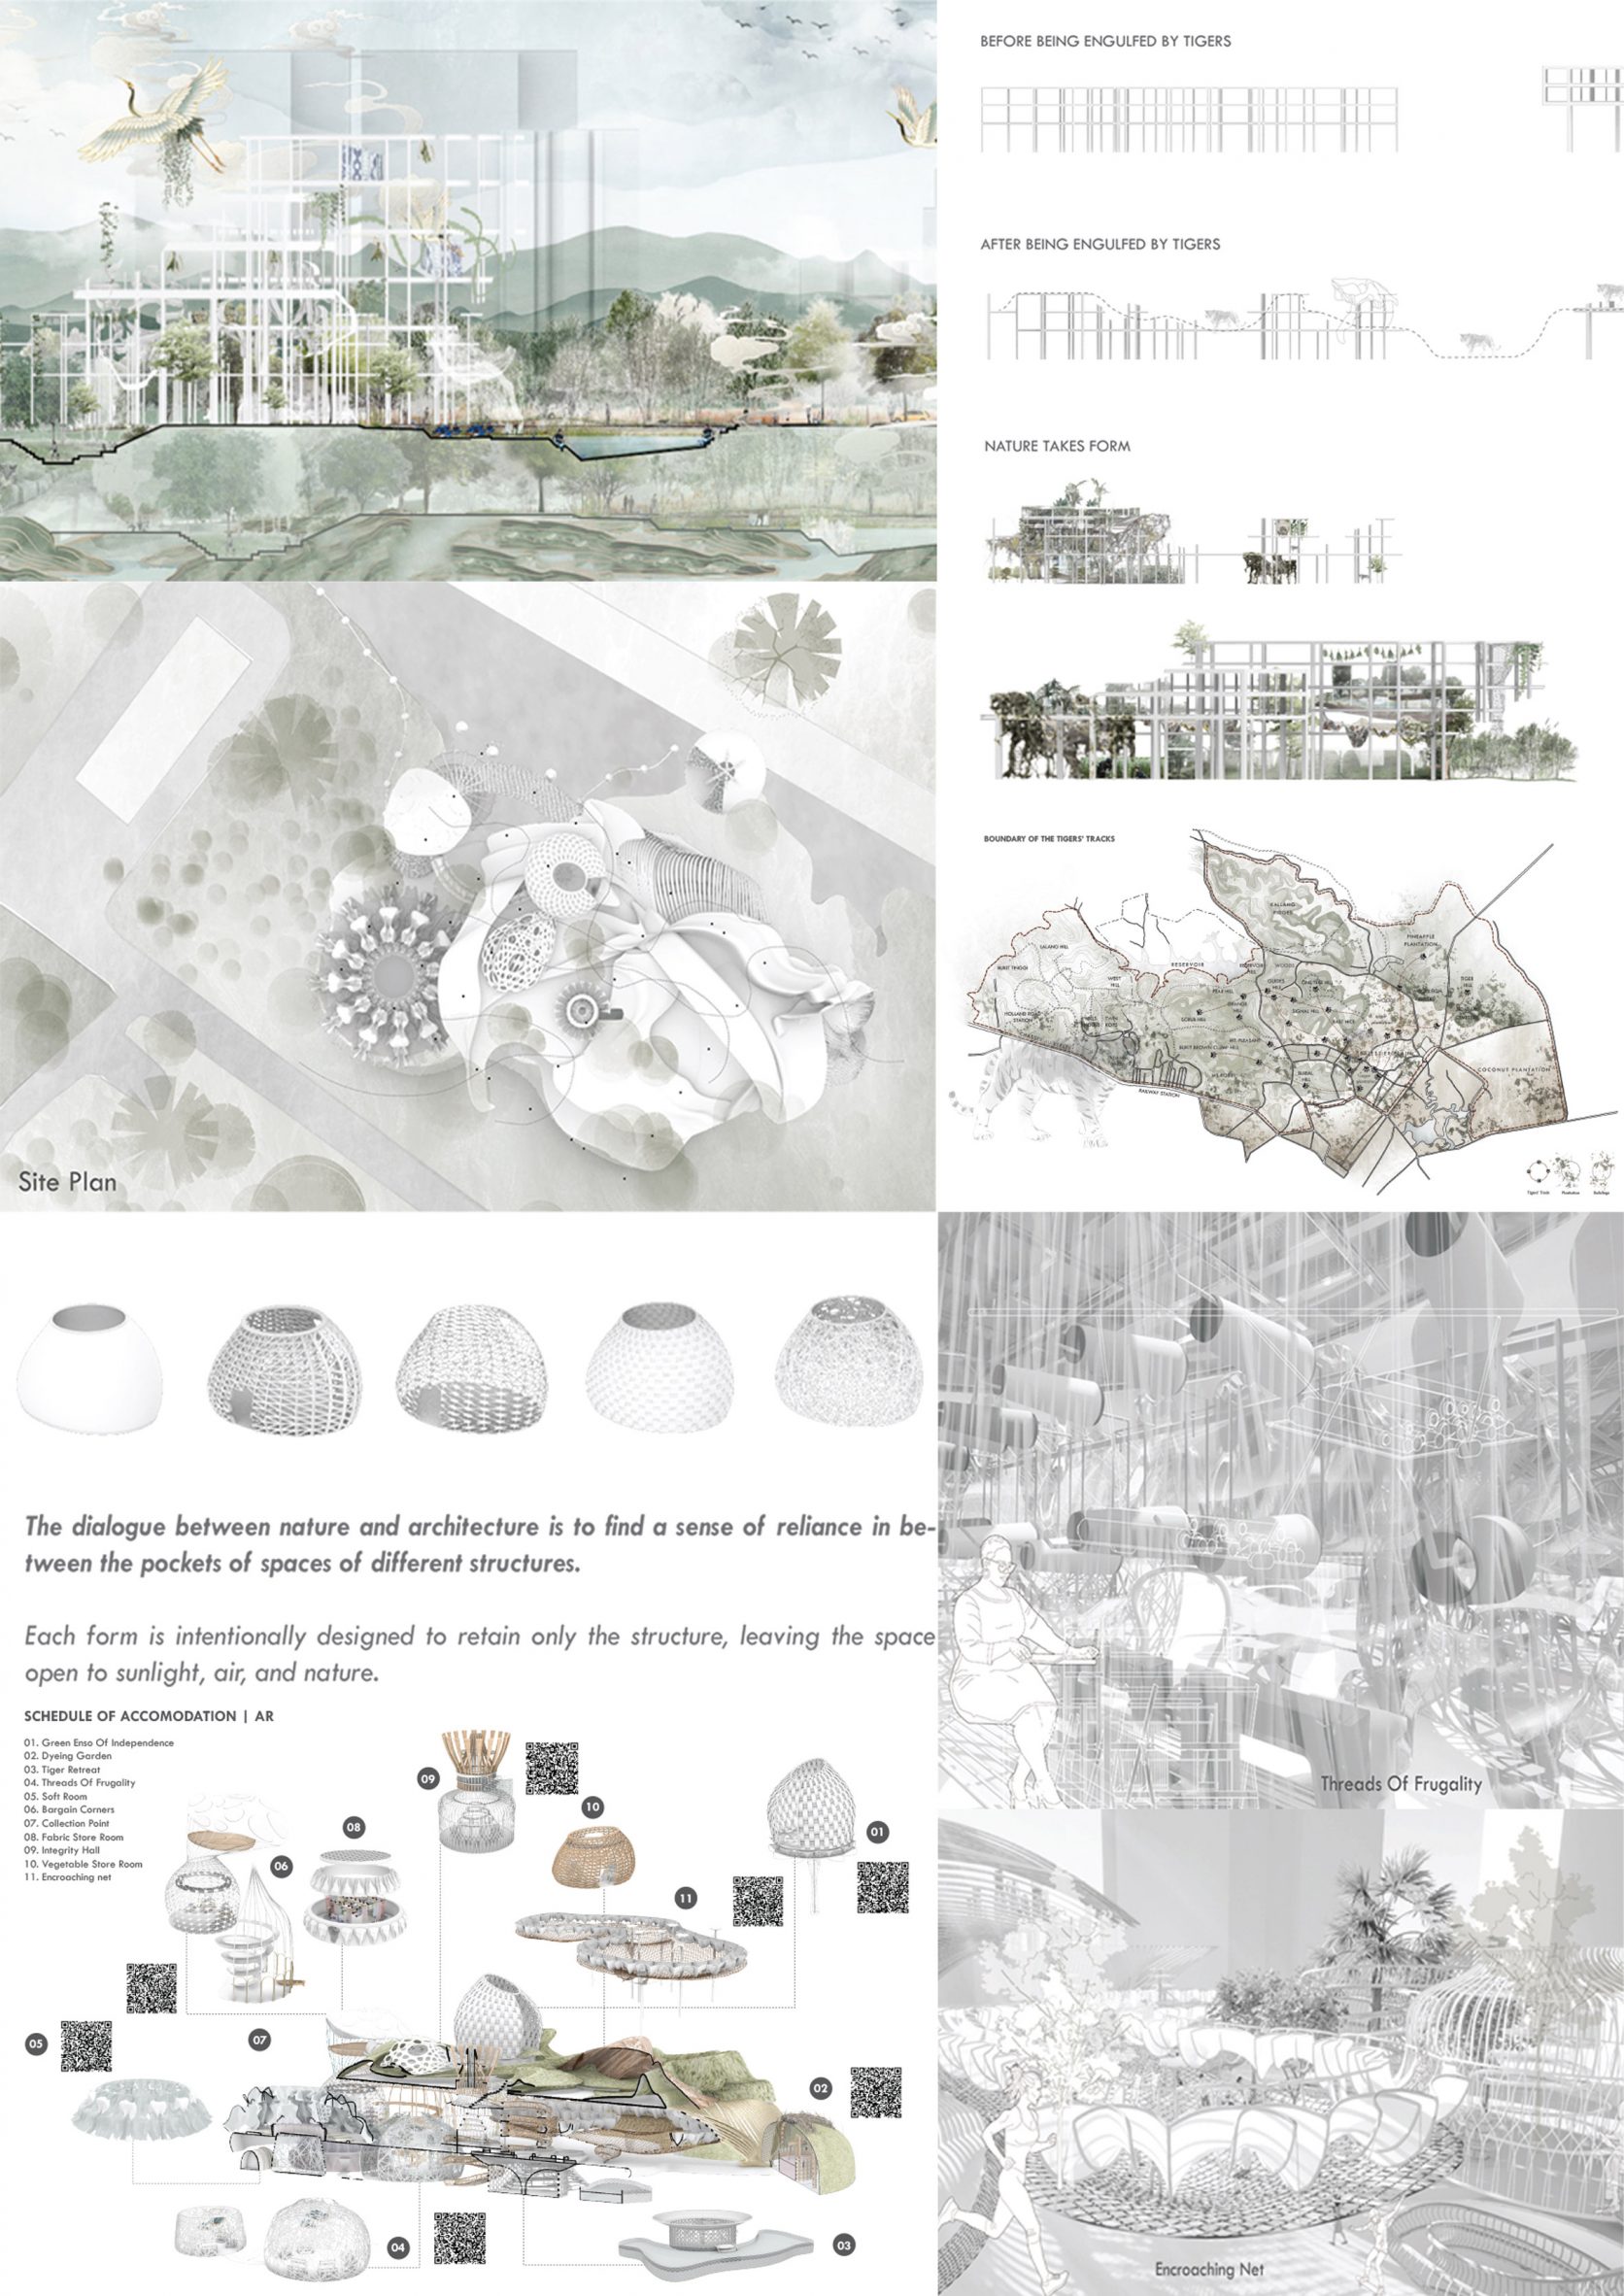 A series of grey and green graphics showing the reinterpretation of an urban ecosystem